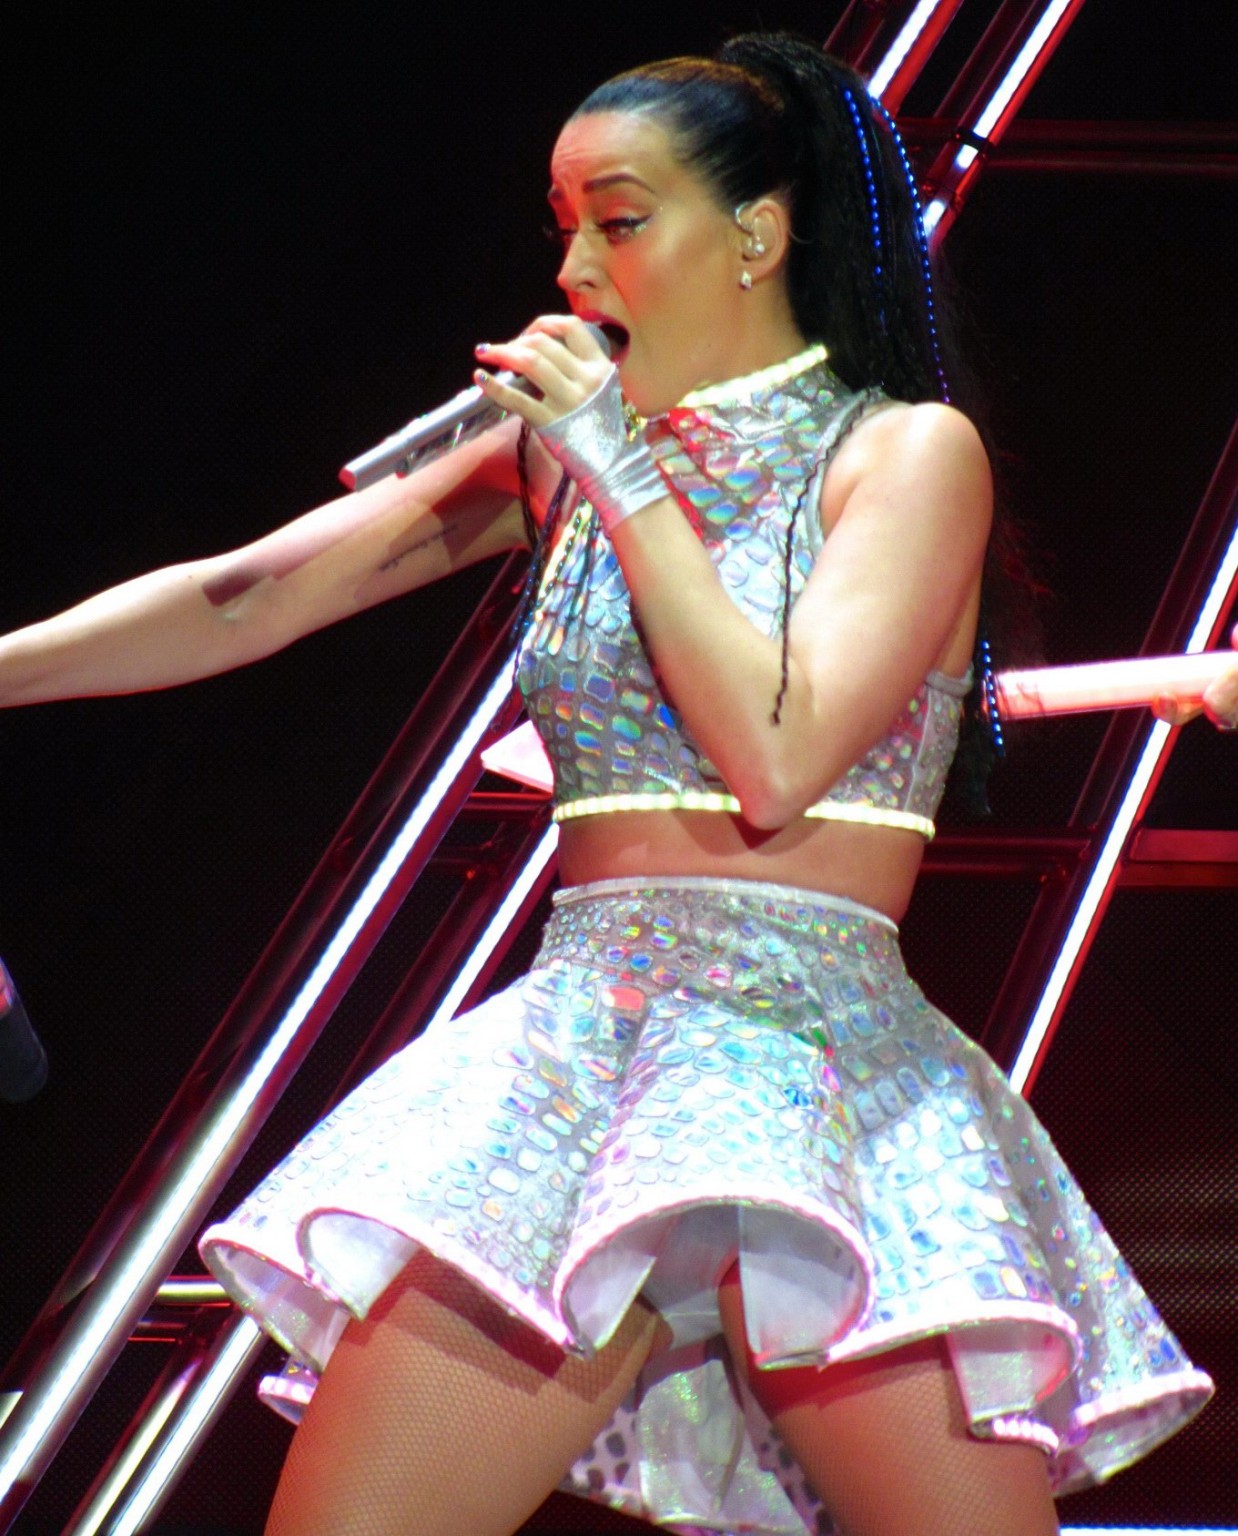 Katy Perry upskirt on stage at the Prismatic tour in Belfast #75197099